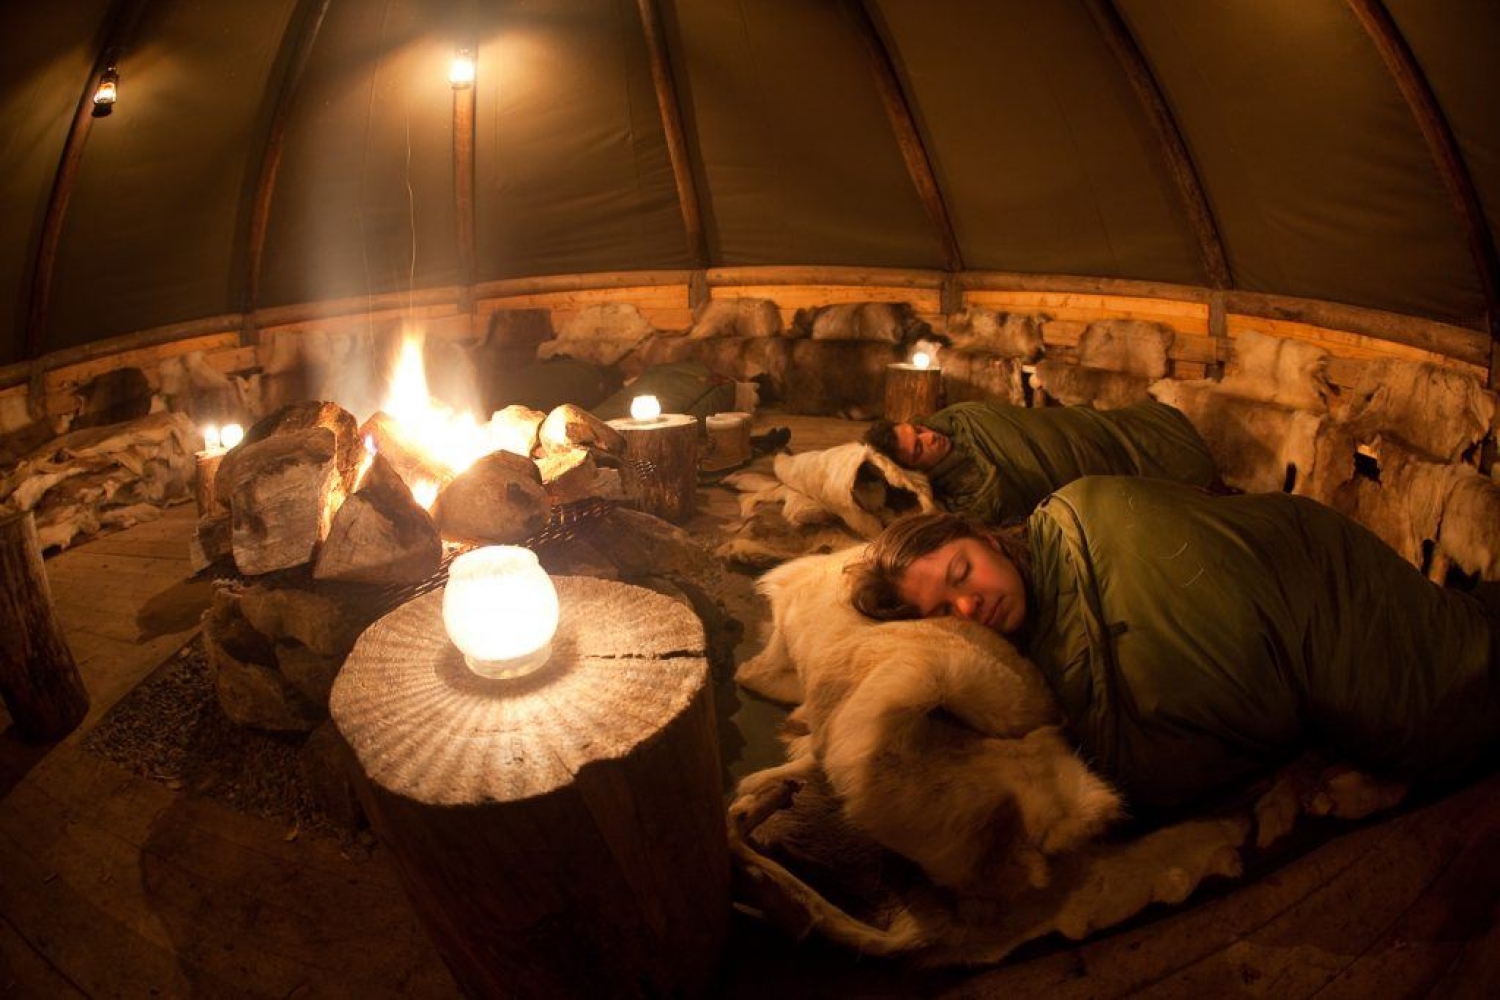 guests sleeping in one of the lavvos/huts